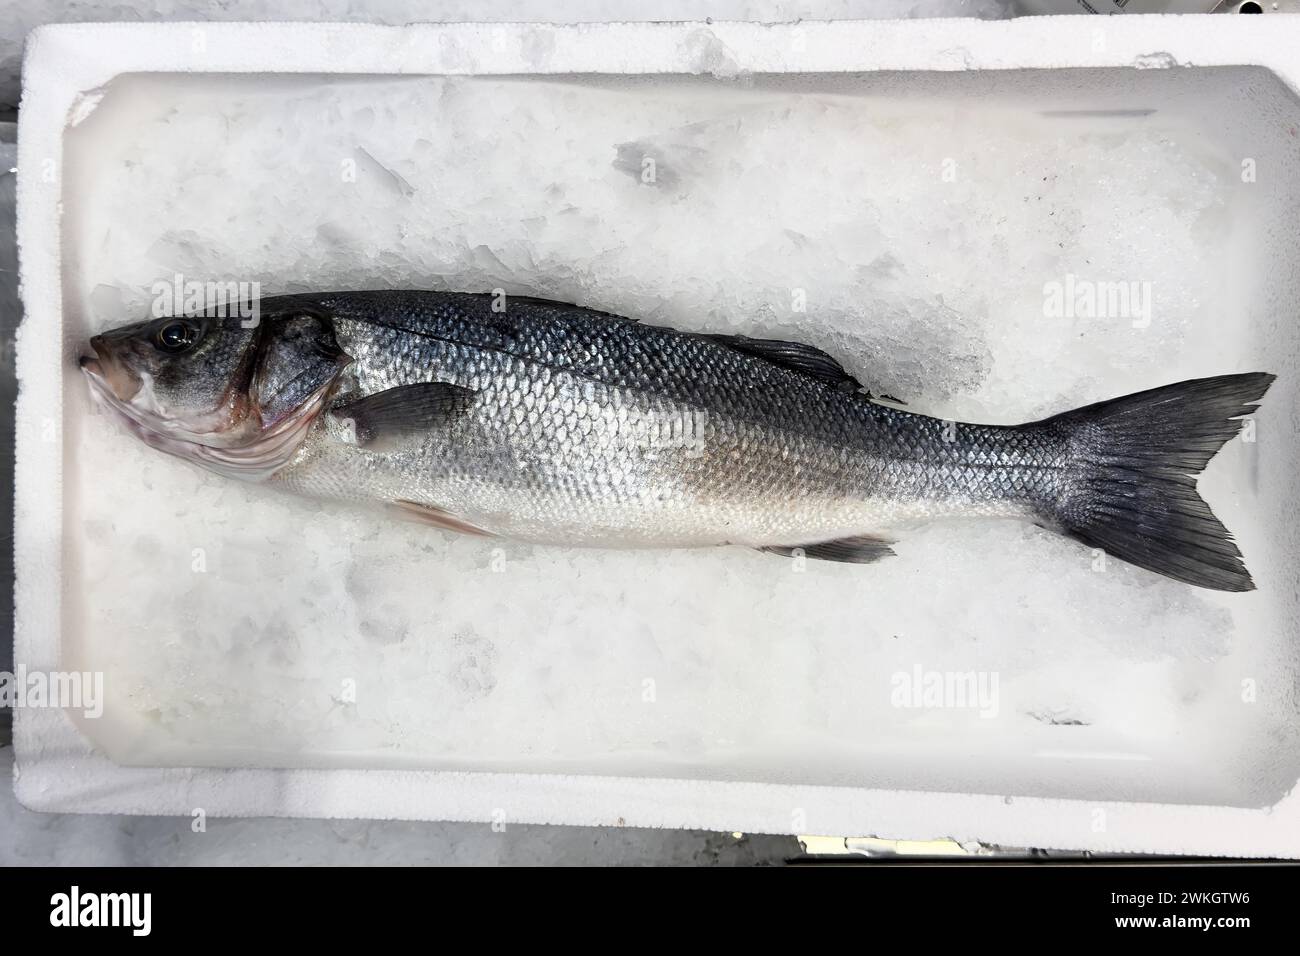 Display of fish caught whole fish temperate basses (Moronidae) Loup de Mer Branzino Spinola on ice in refrigerated counter fish counter of fishmonger Stock Photo